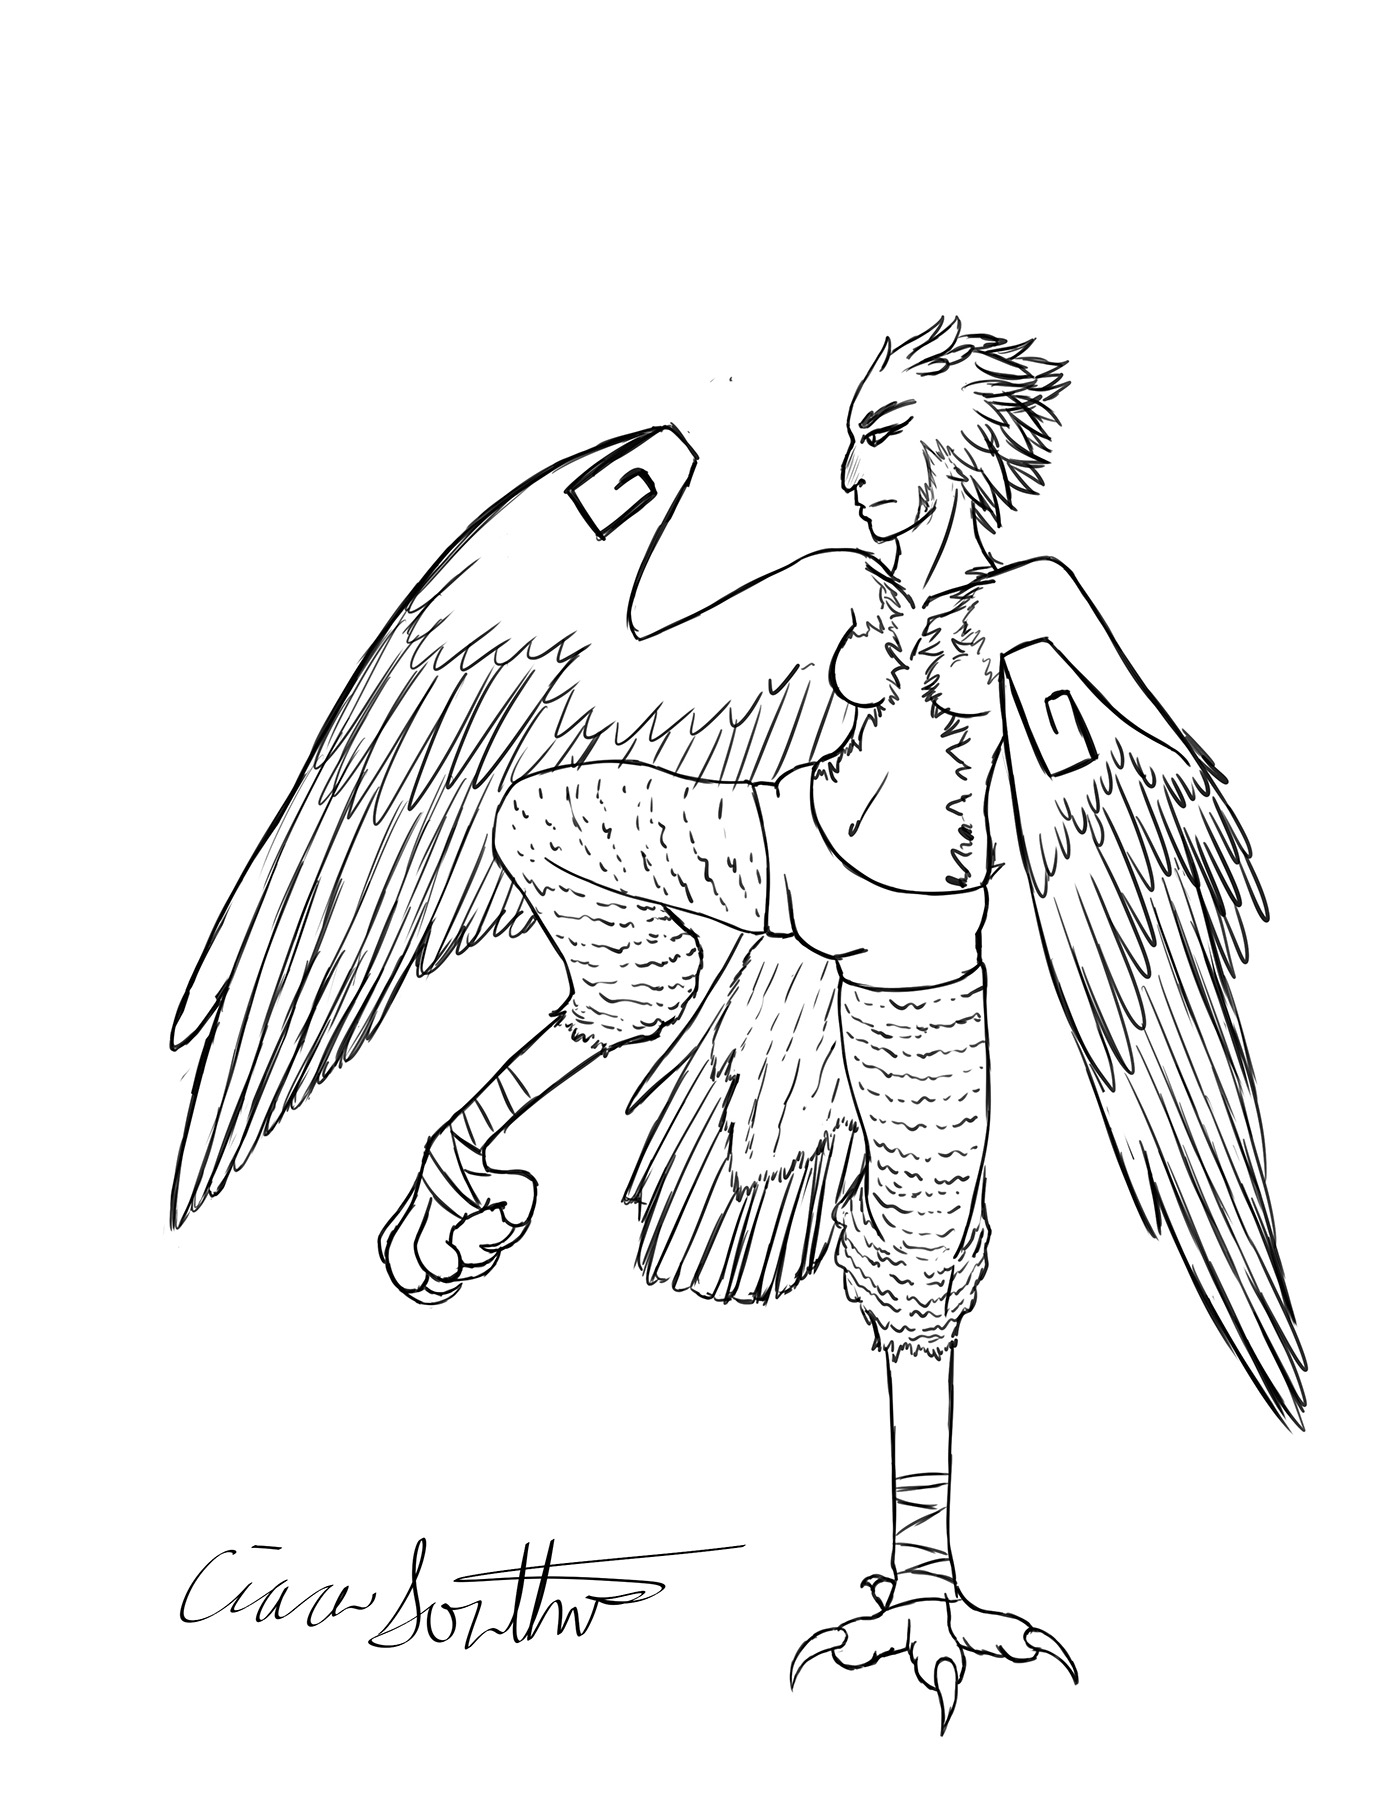 harpy kick boxing harpy eagle mythical concept art Character design 